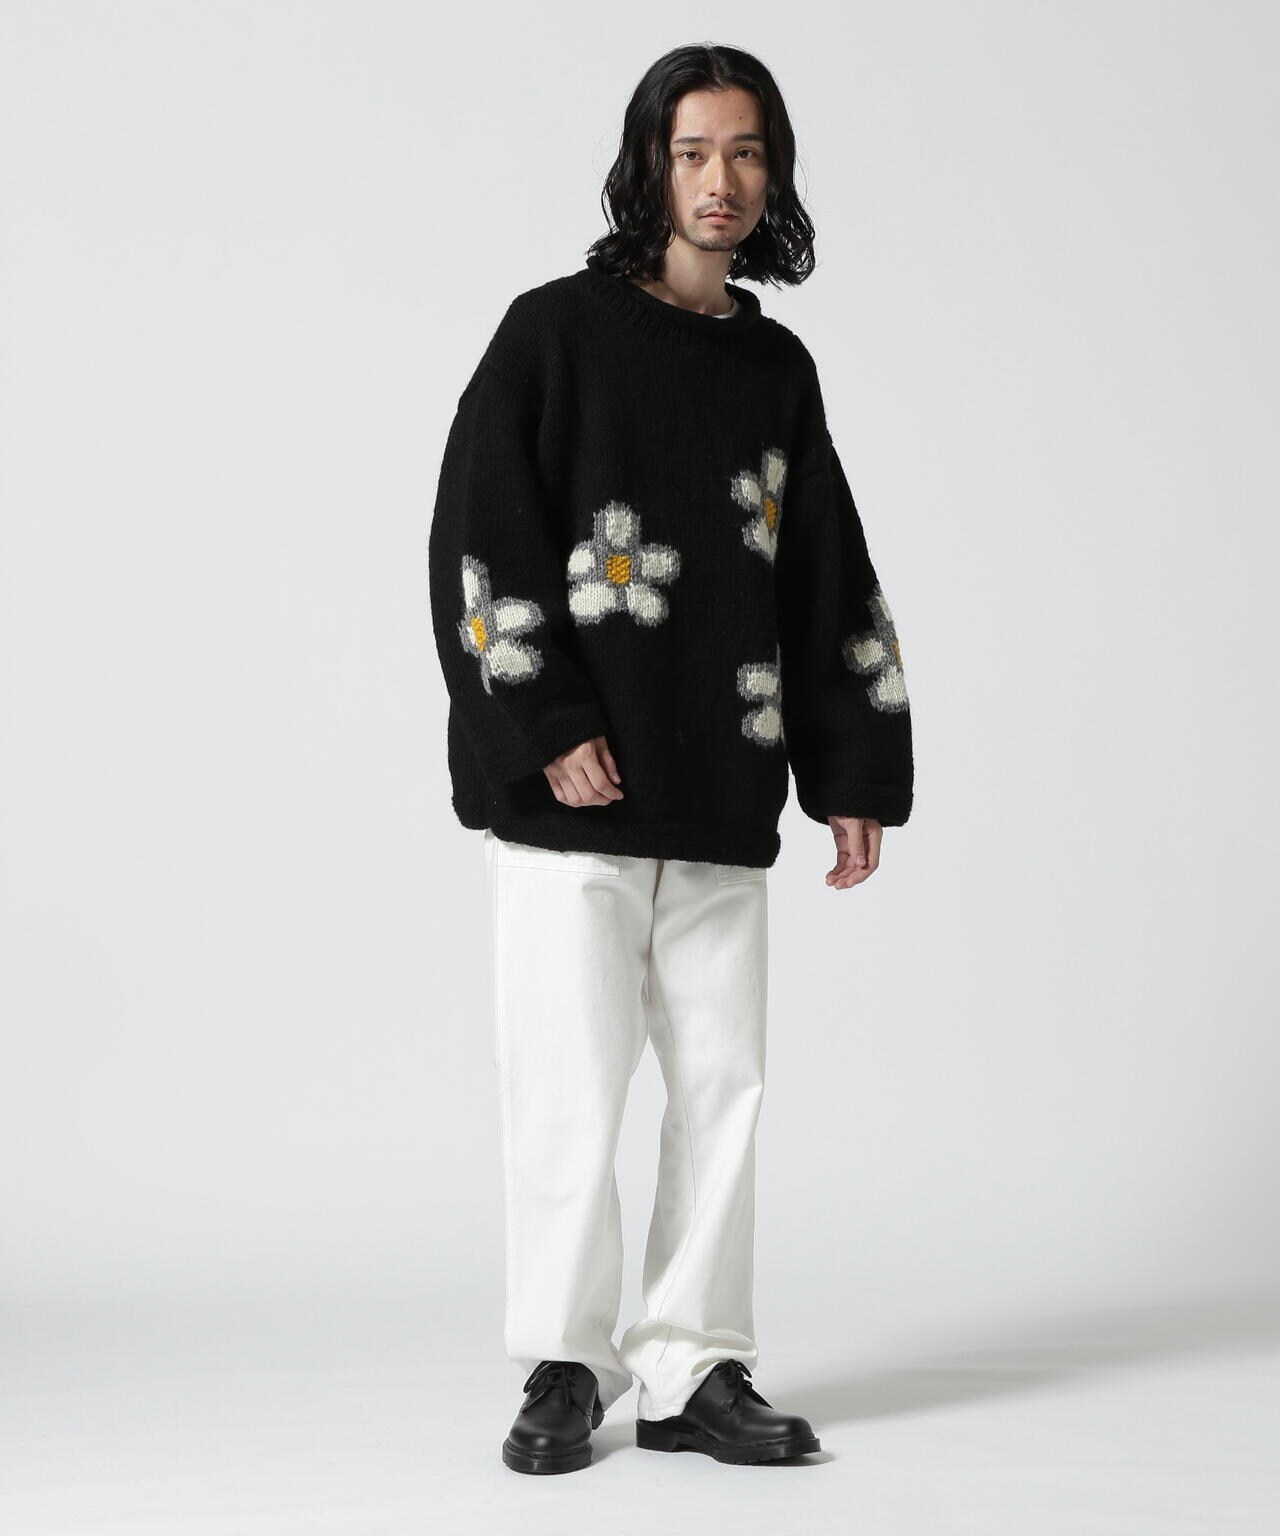 MacMahon Knitting Mills / Roll Neck Knit-Sparse Flower | B'2nd